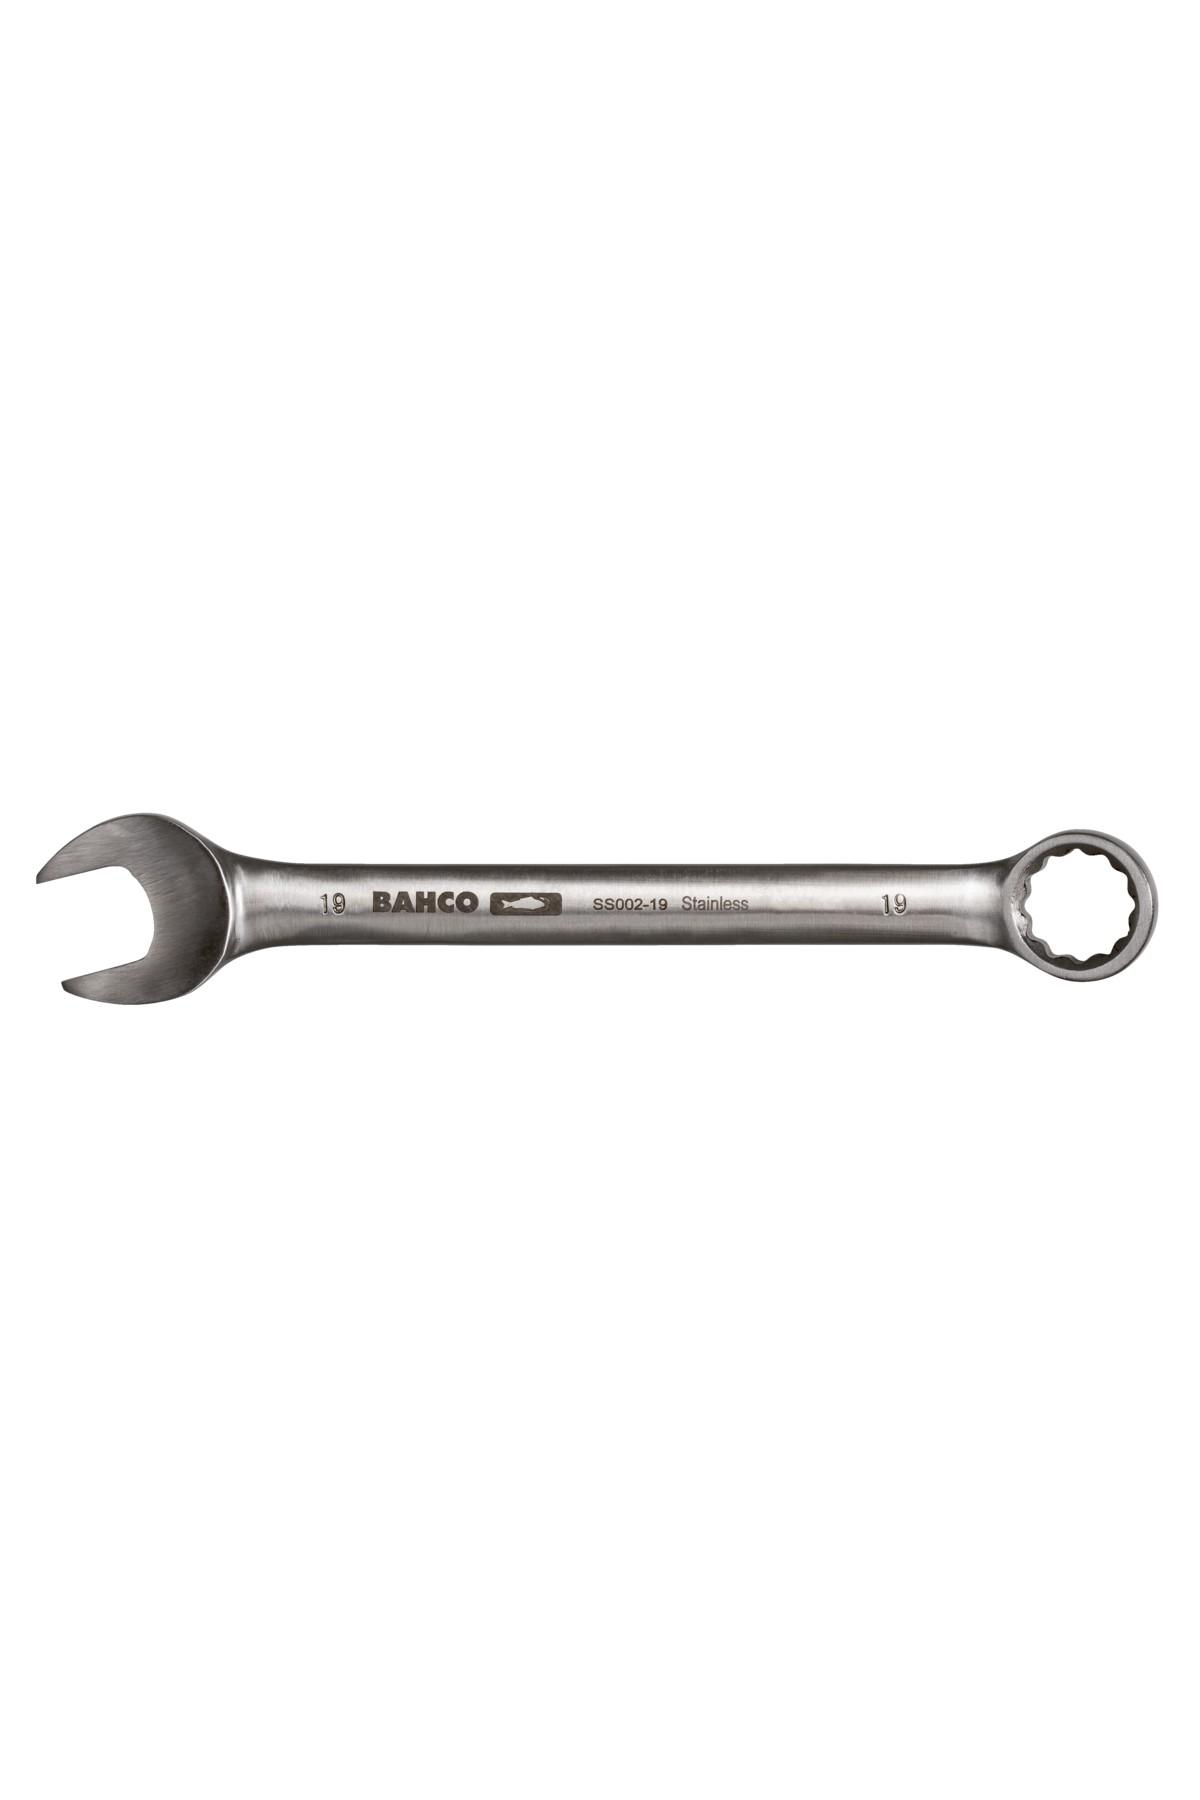 Ring spanner stainless 10mm